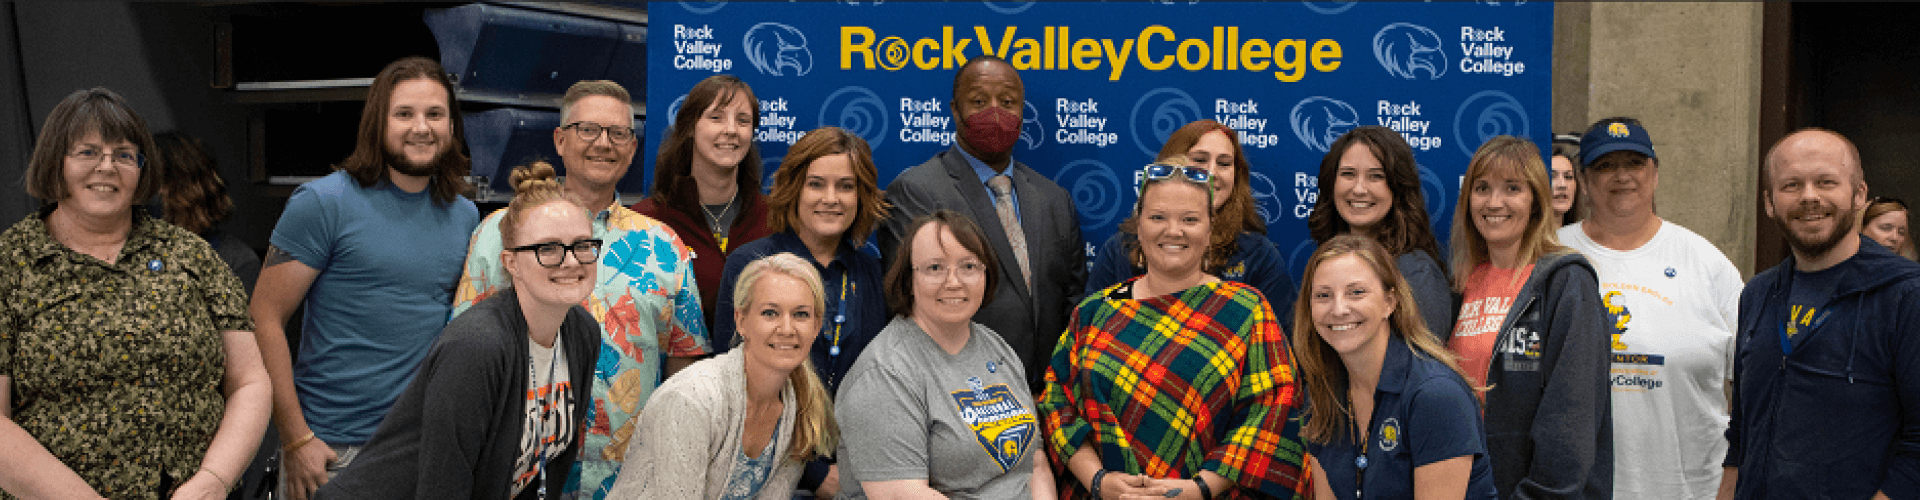 Rock Valley College cover